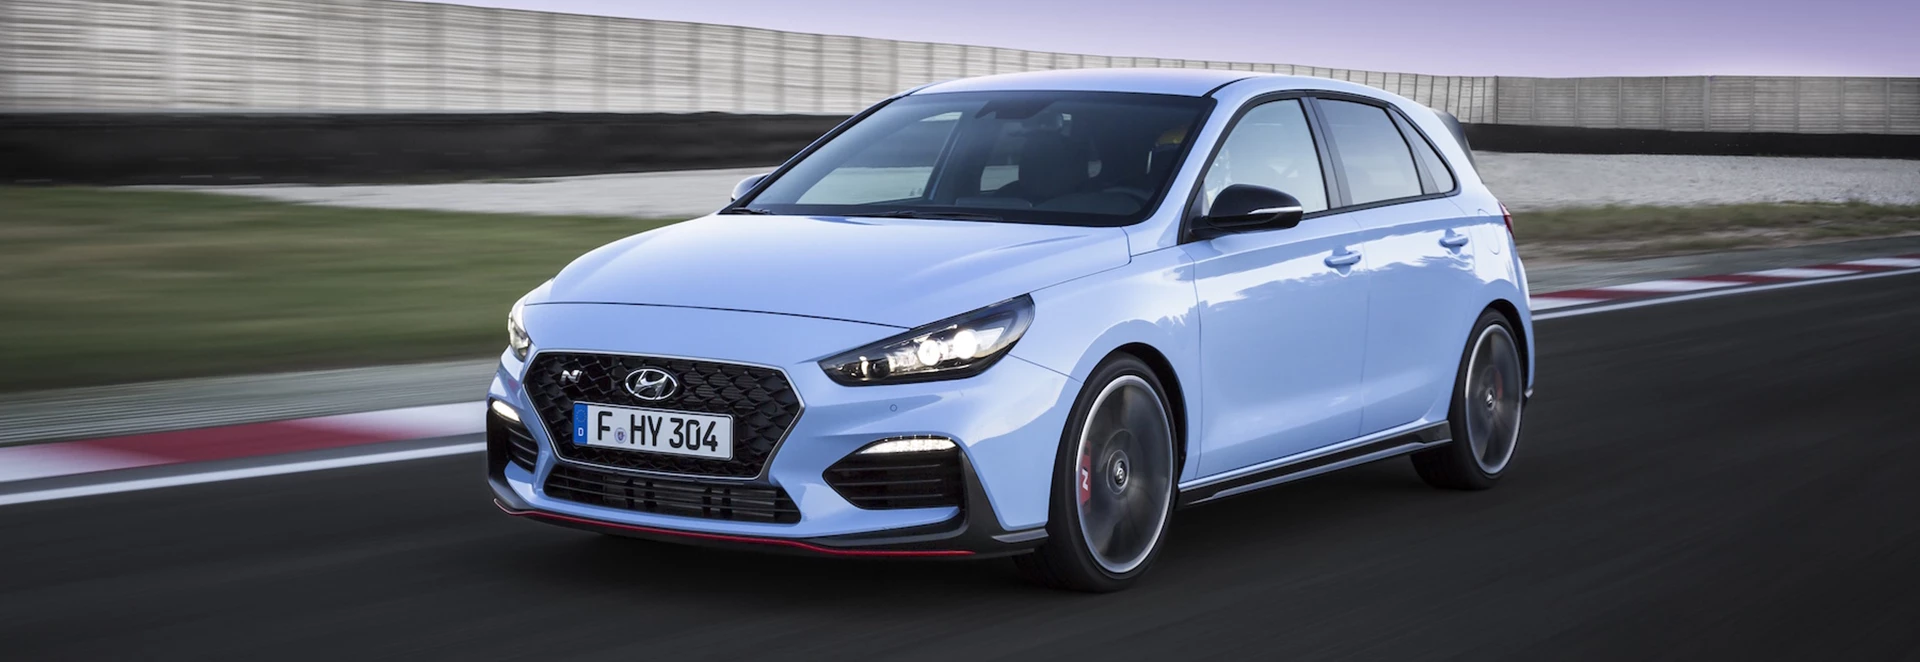 Hyundai reveals specification for i30 N – prices start from £24,995 